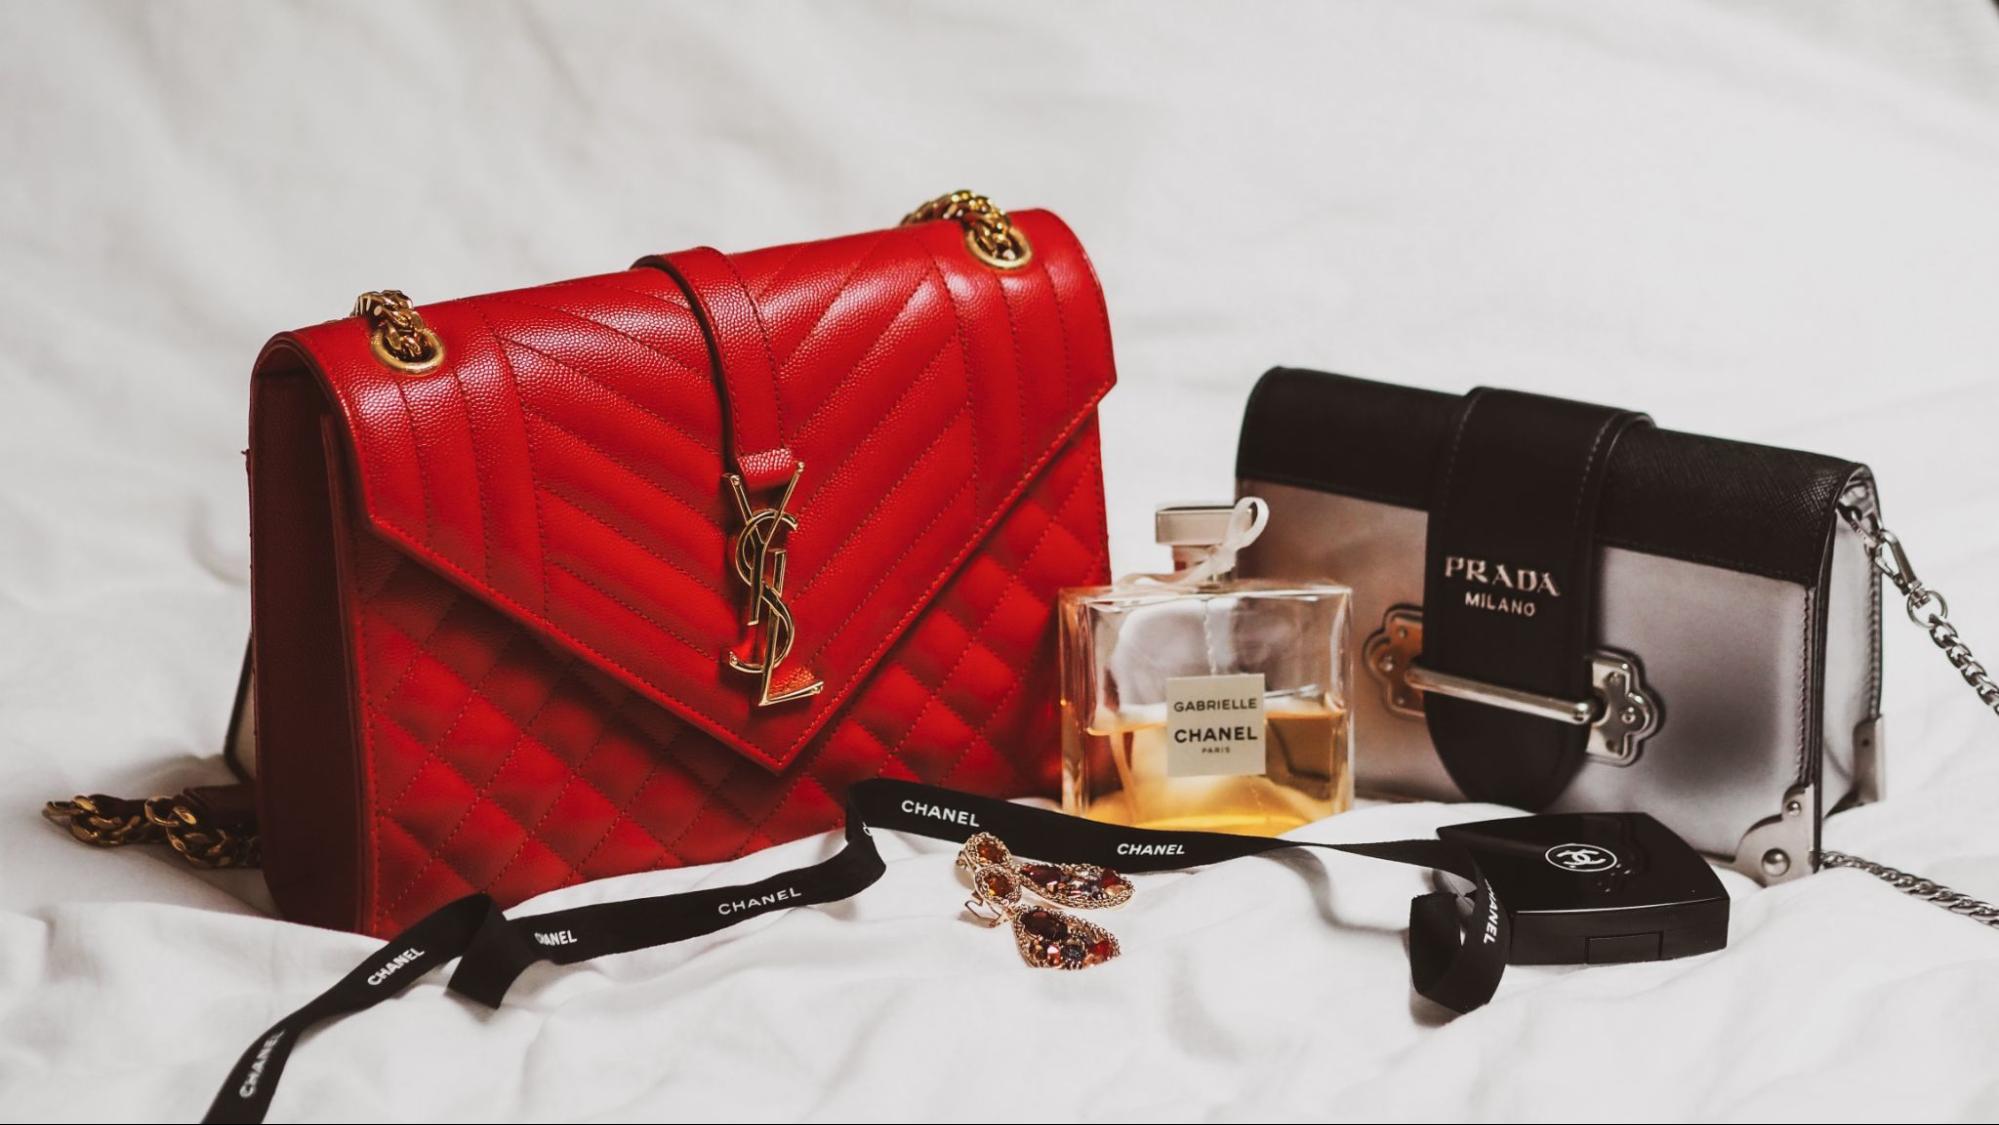 Guide To Buying Pre-Loved Luxury Bags – Things To Look Out For